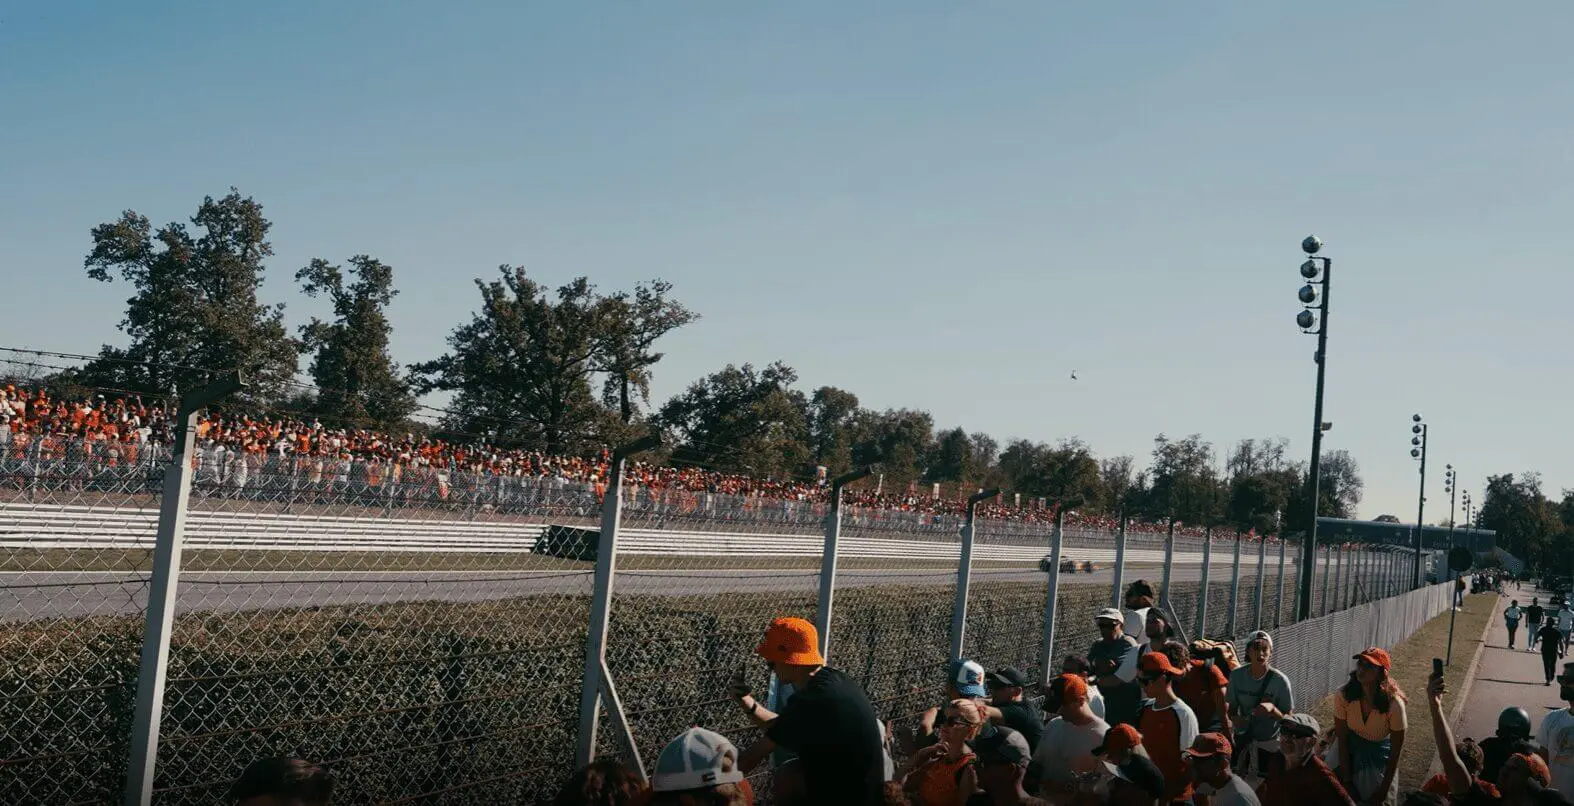 Image of crowds gathering around the side of the racetrack